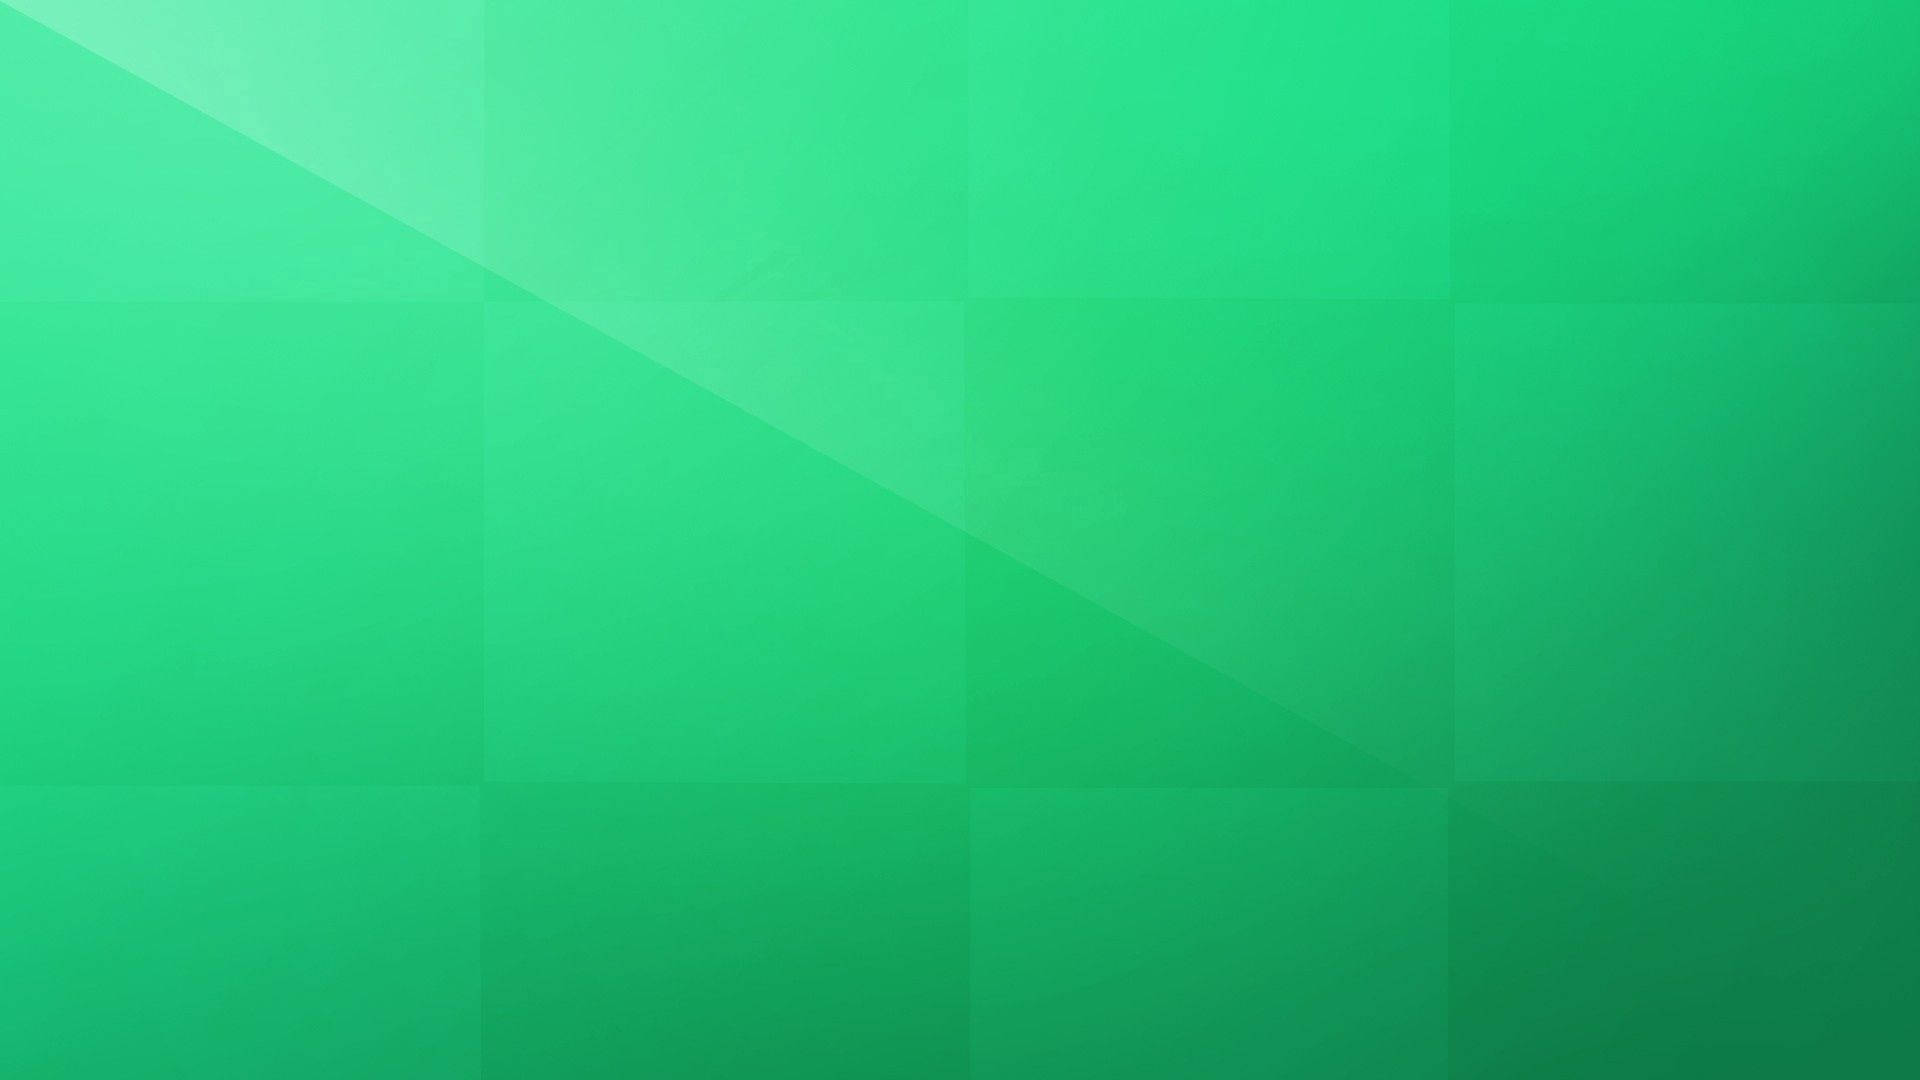 Pixelated Green Solid Color Wallpaper